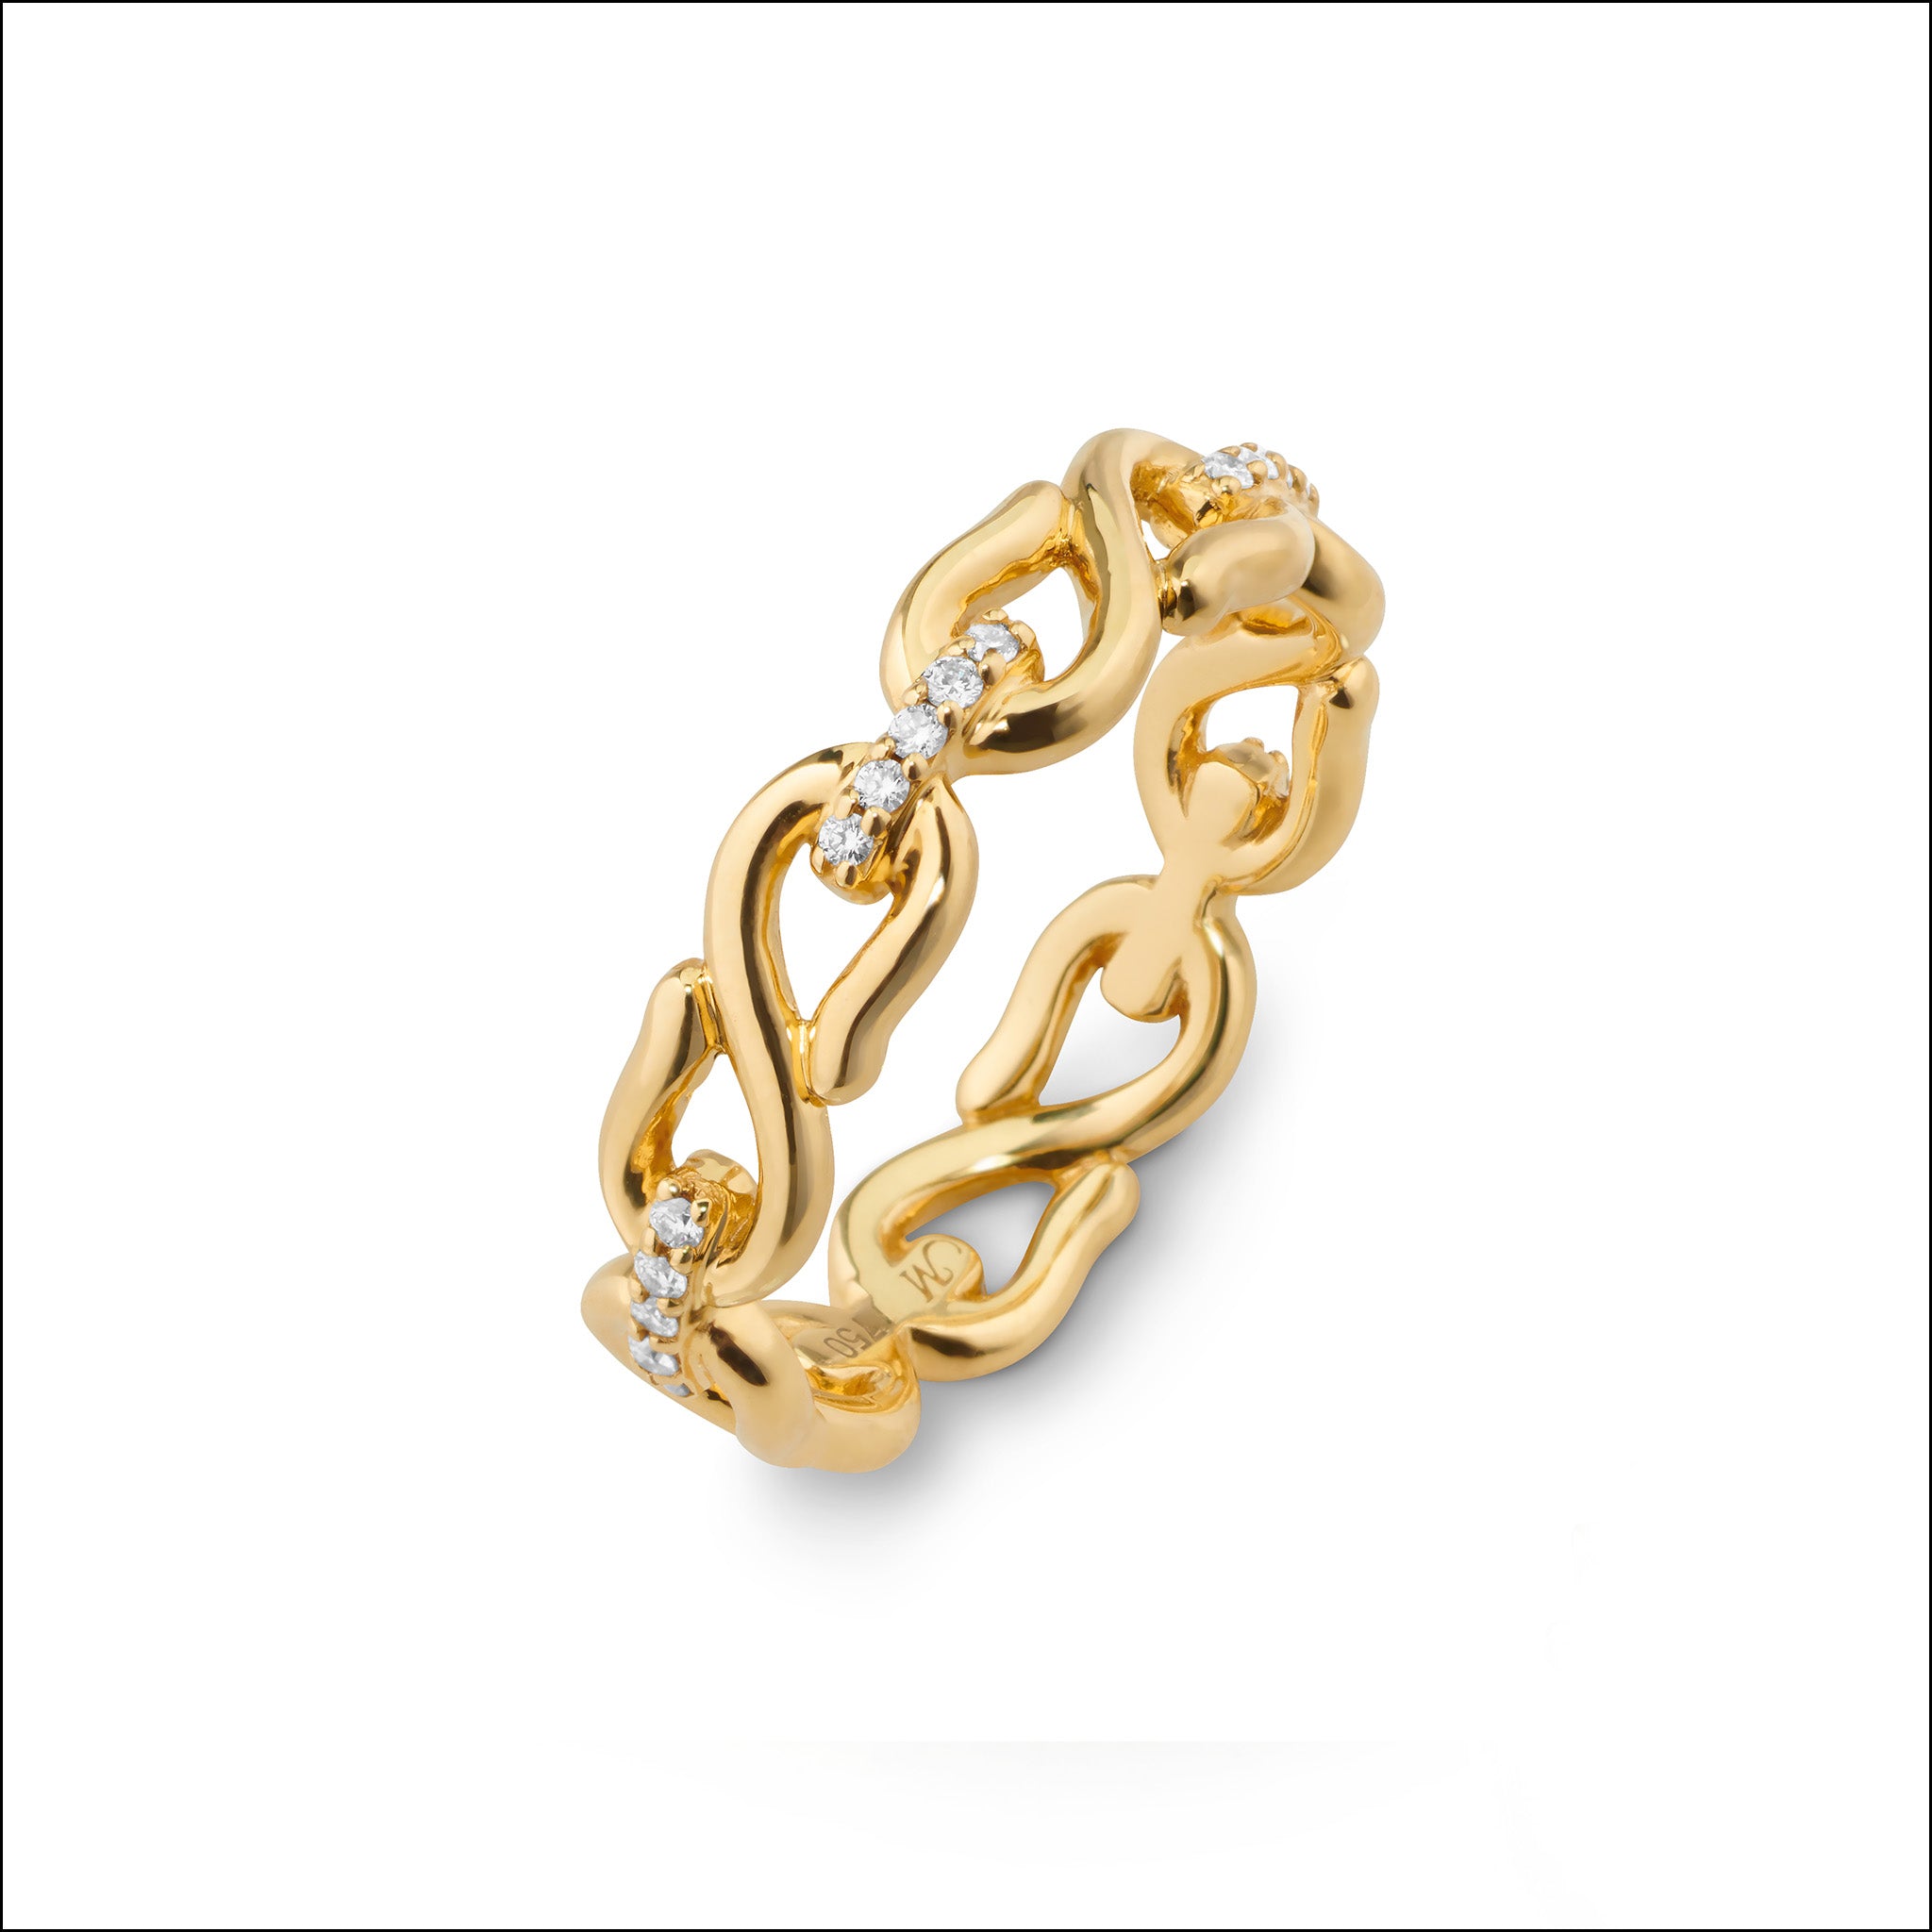 Buy quality Gold Ladies Ring in Ahmedabad